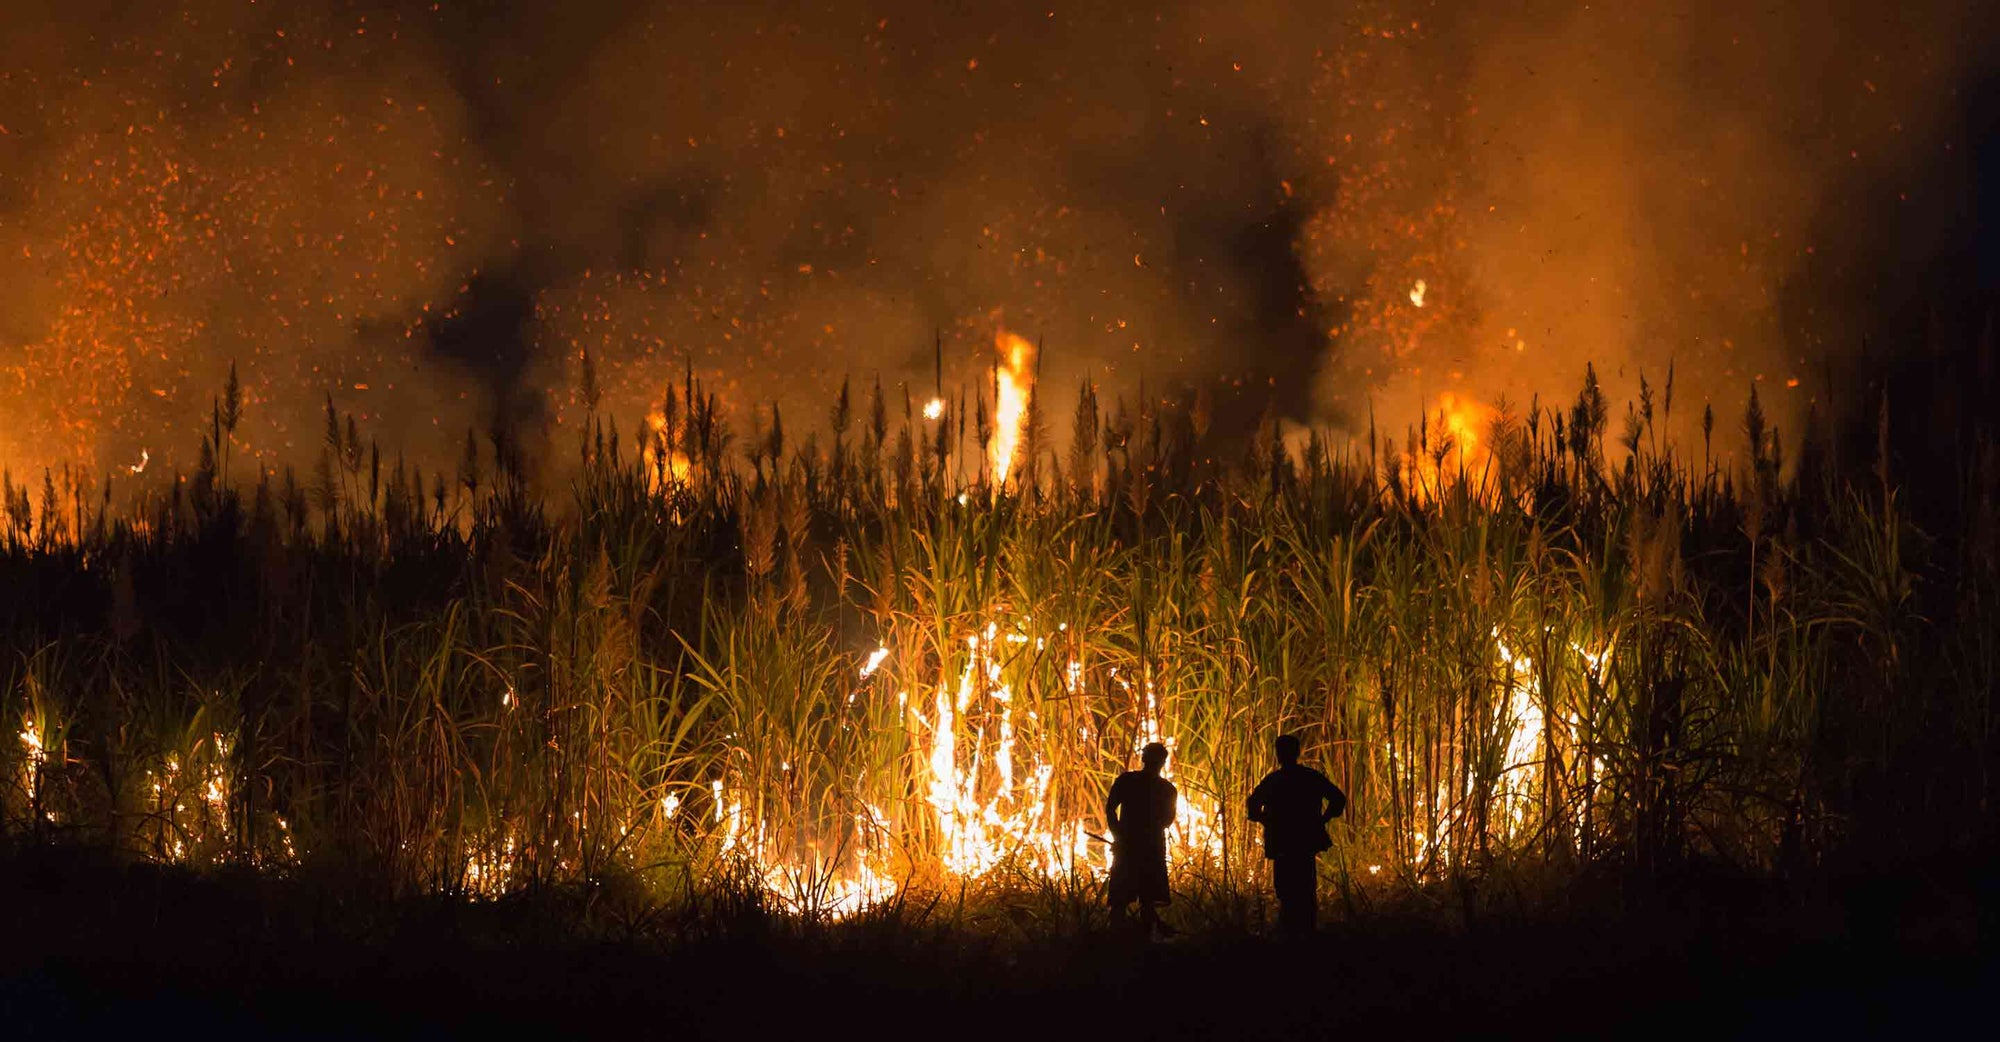 Sugarcane burned by farmer for pre-harvest in Thailand